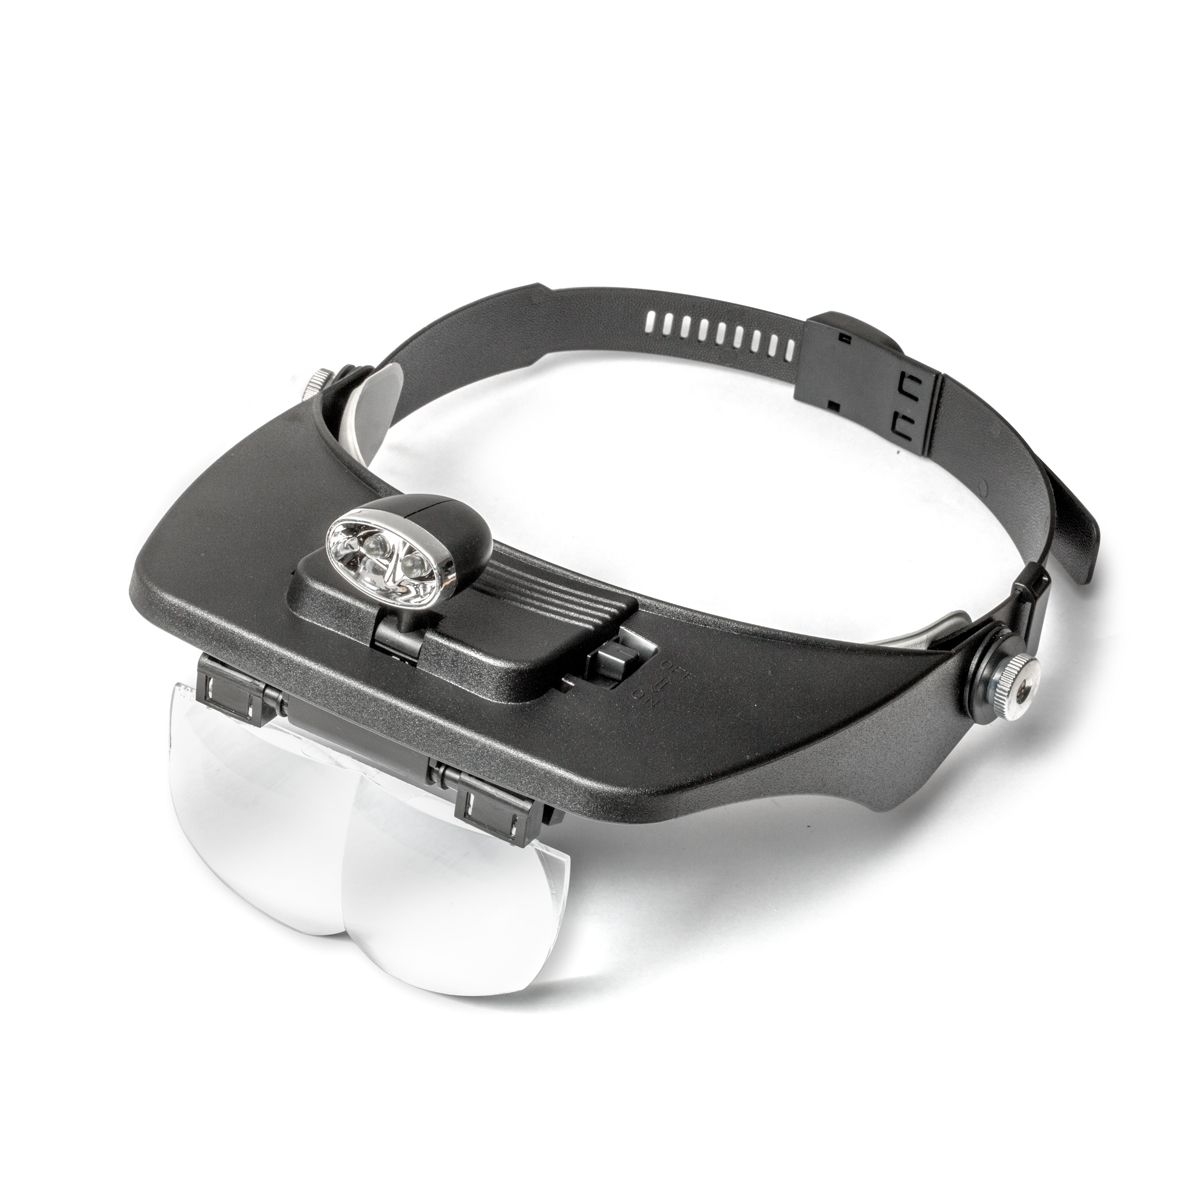 Headband Magnifier With Double LED Light